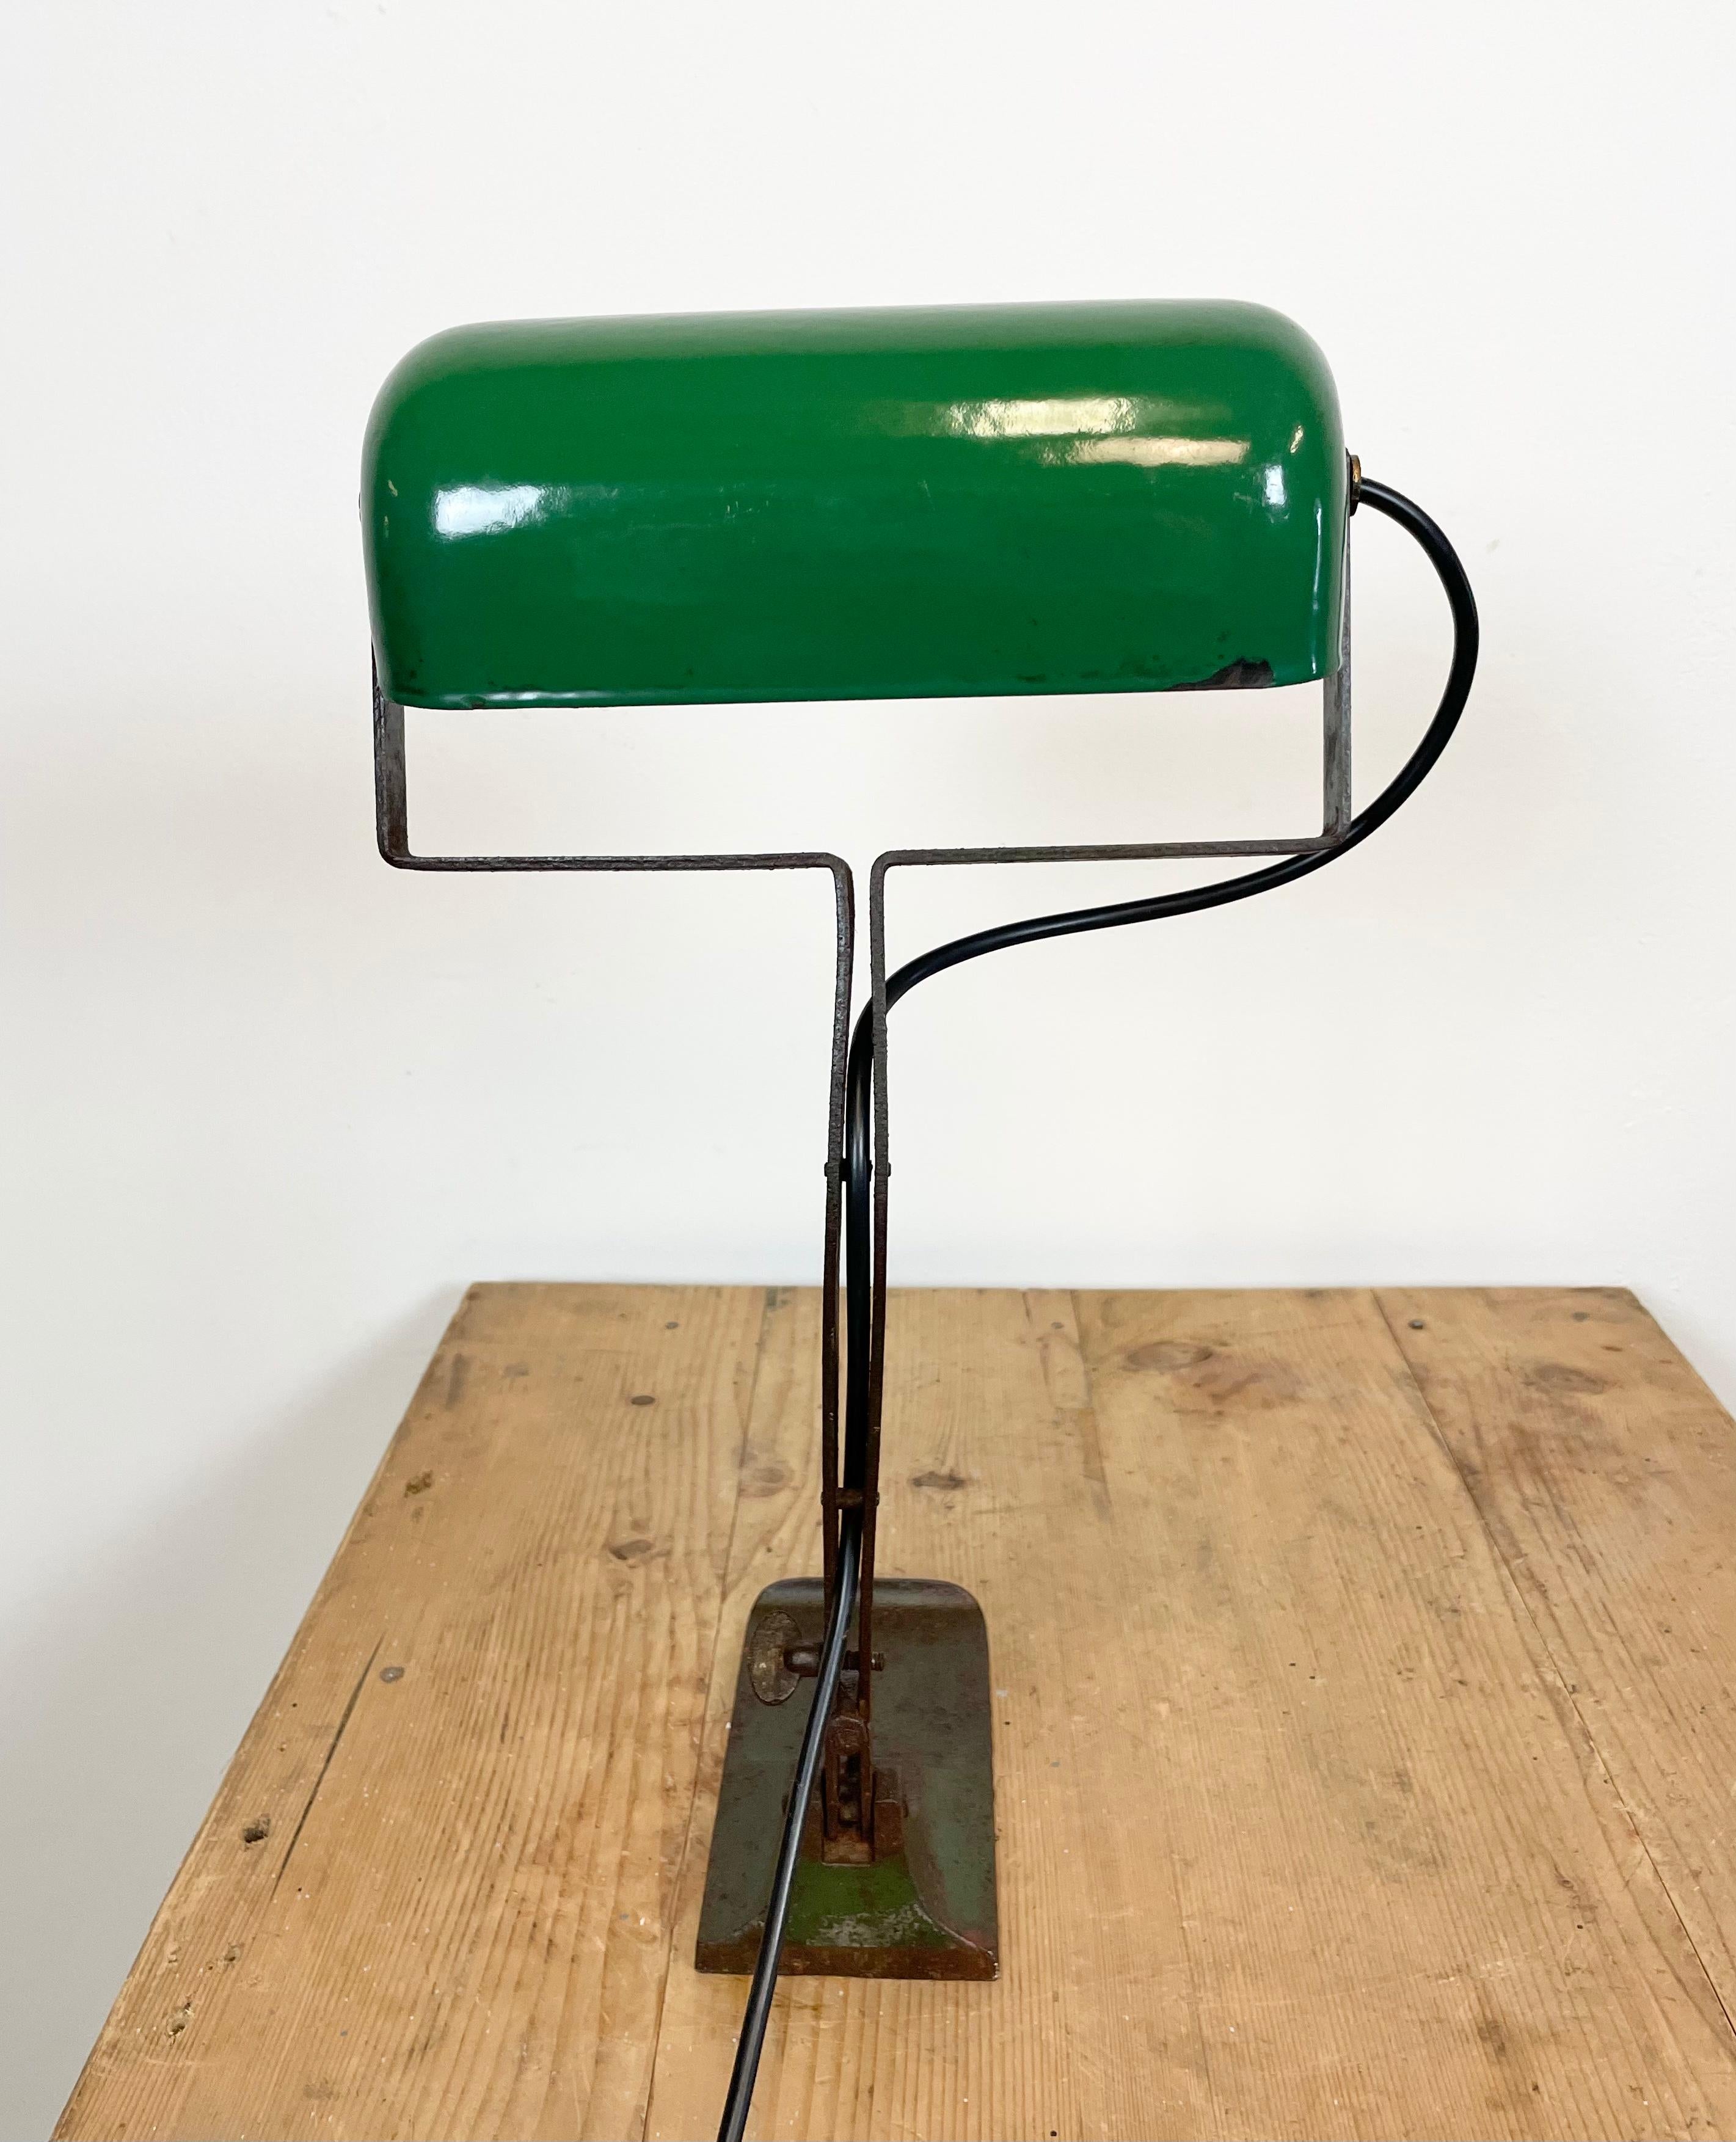 Vintage Green Enamel Bank Lamp from Astral, 1930s For Sale 1